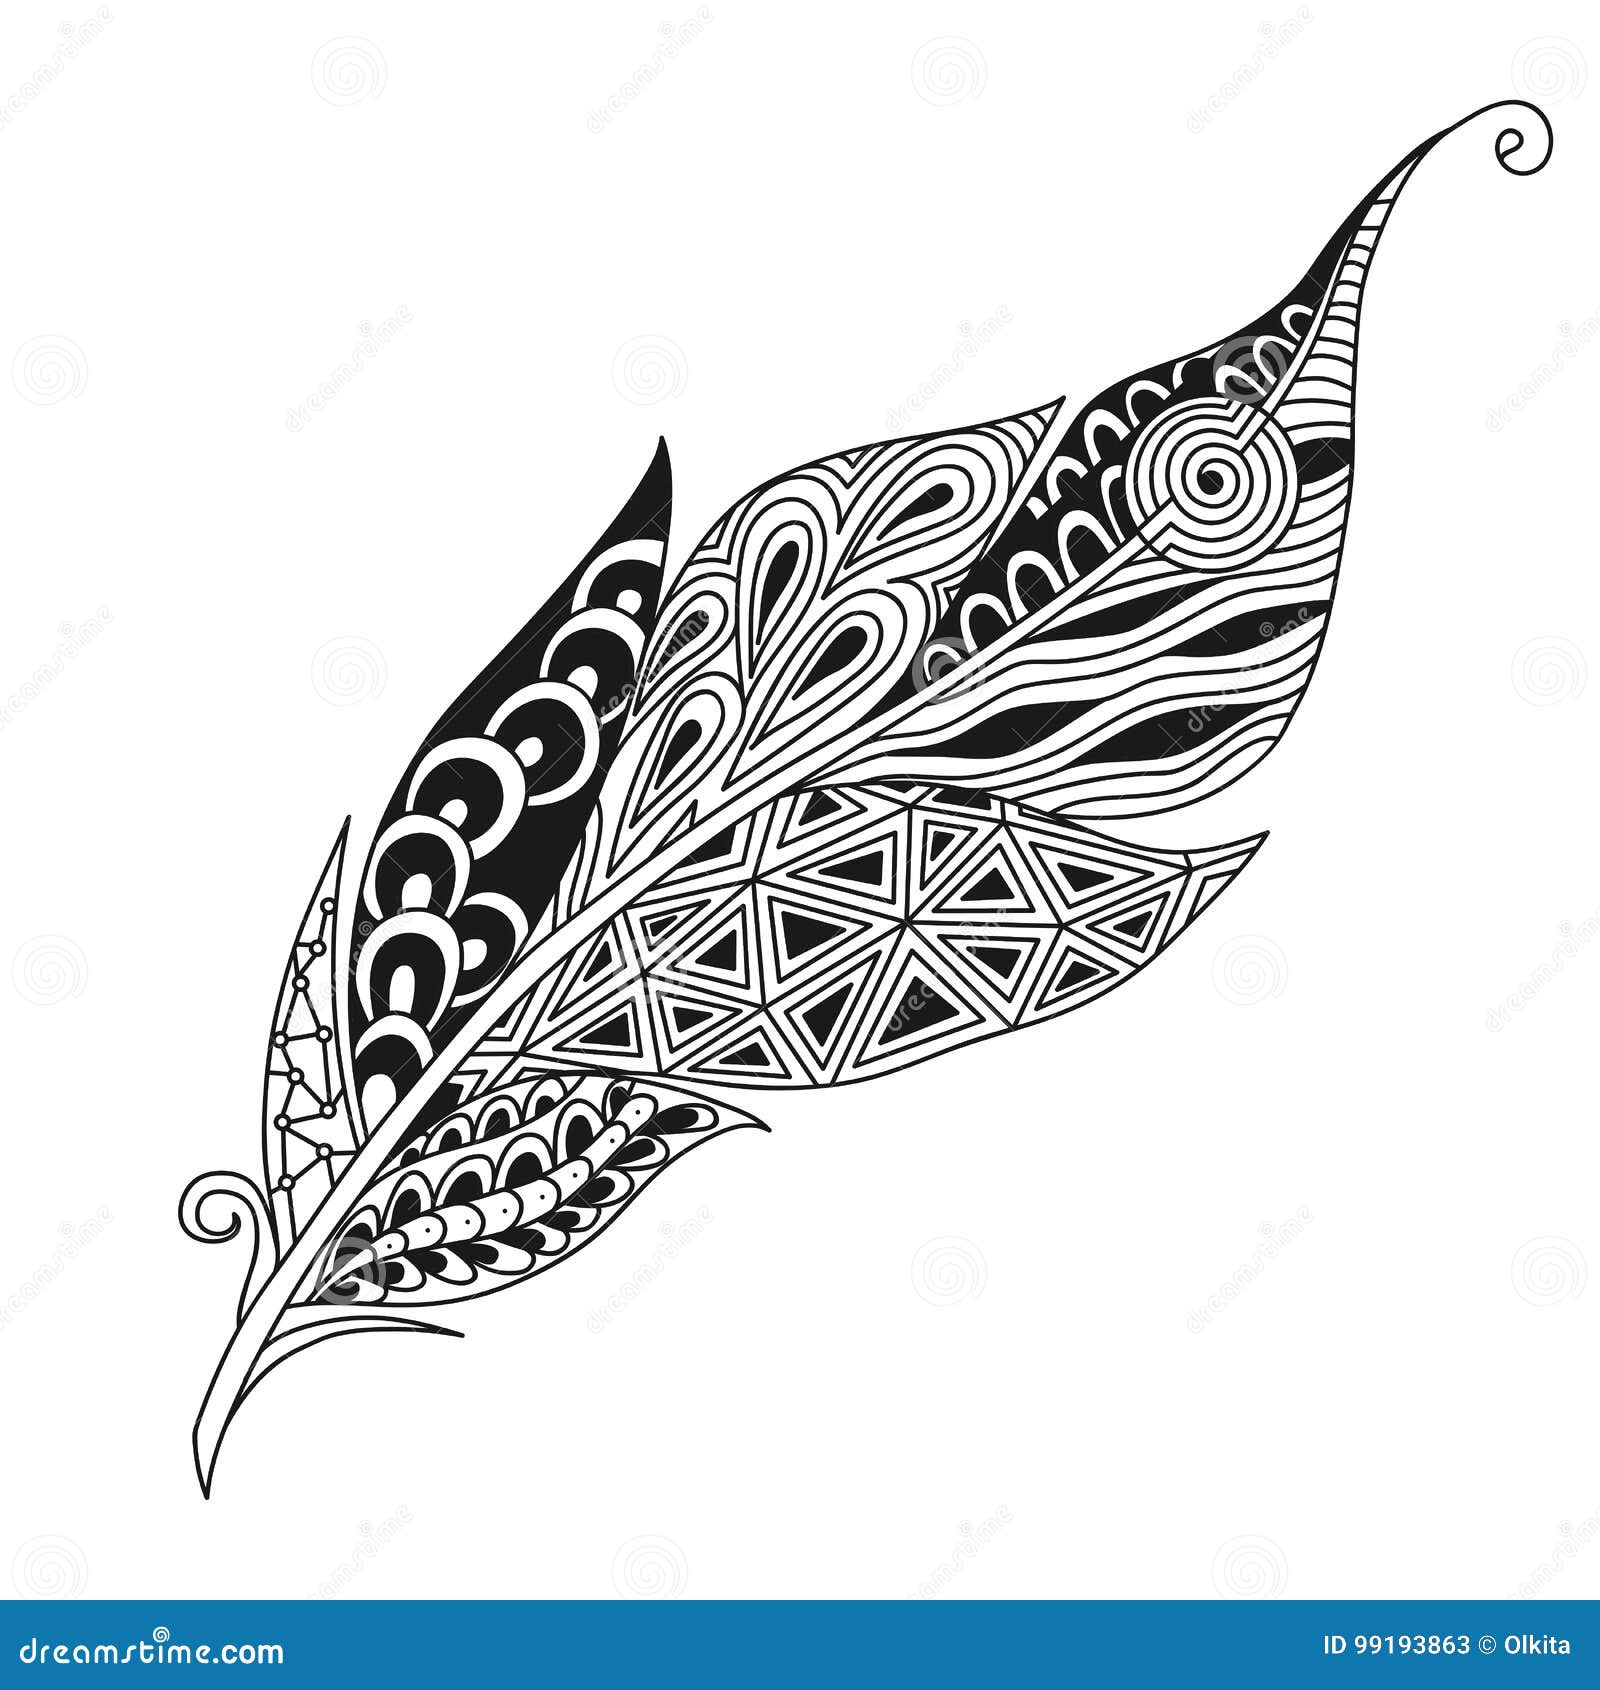 Isolated Hand Drawn Black Outline Monochrome Abstract Ornate Bird ...